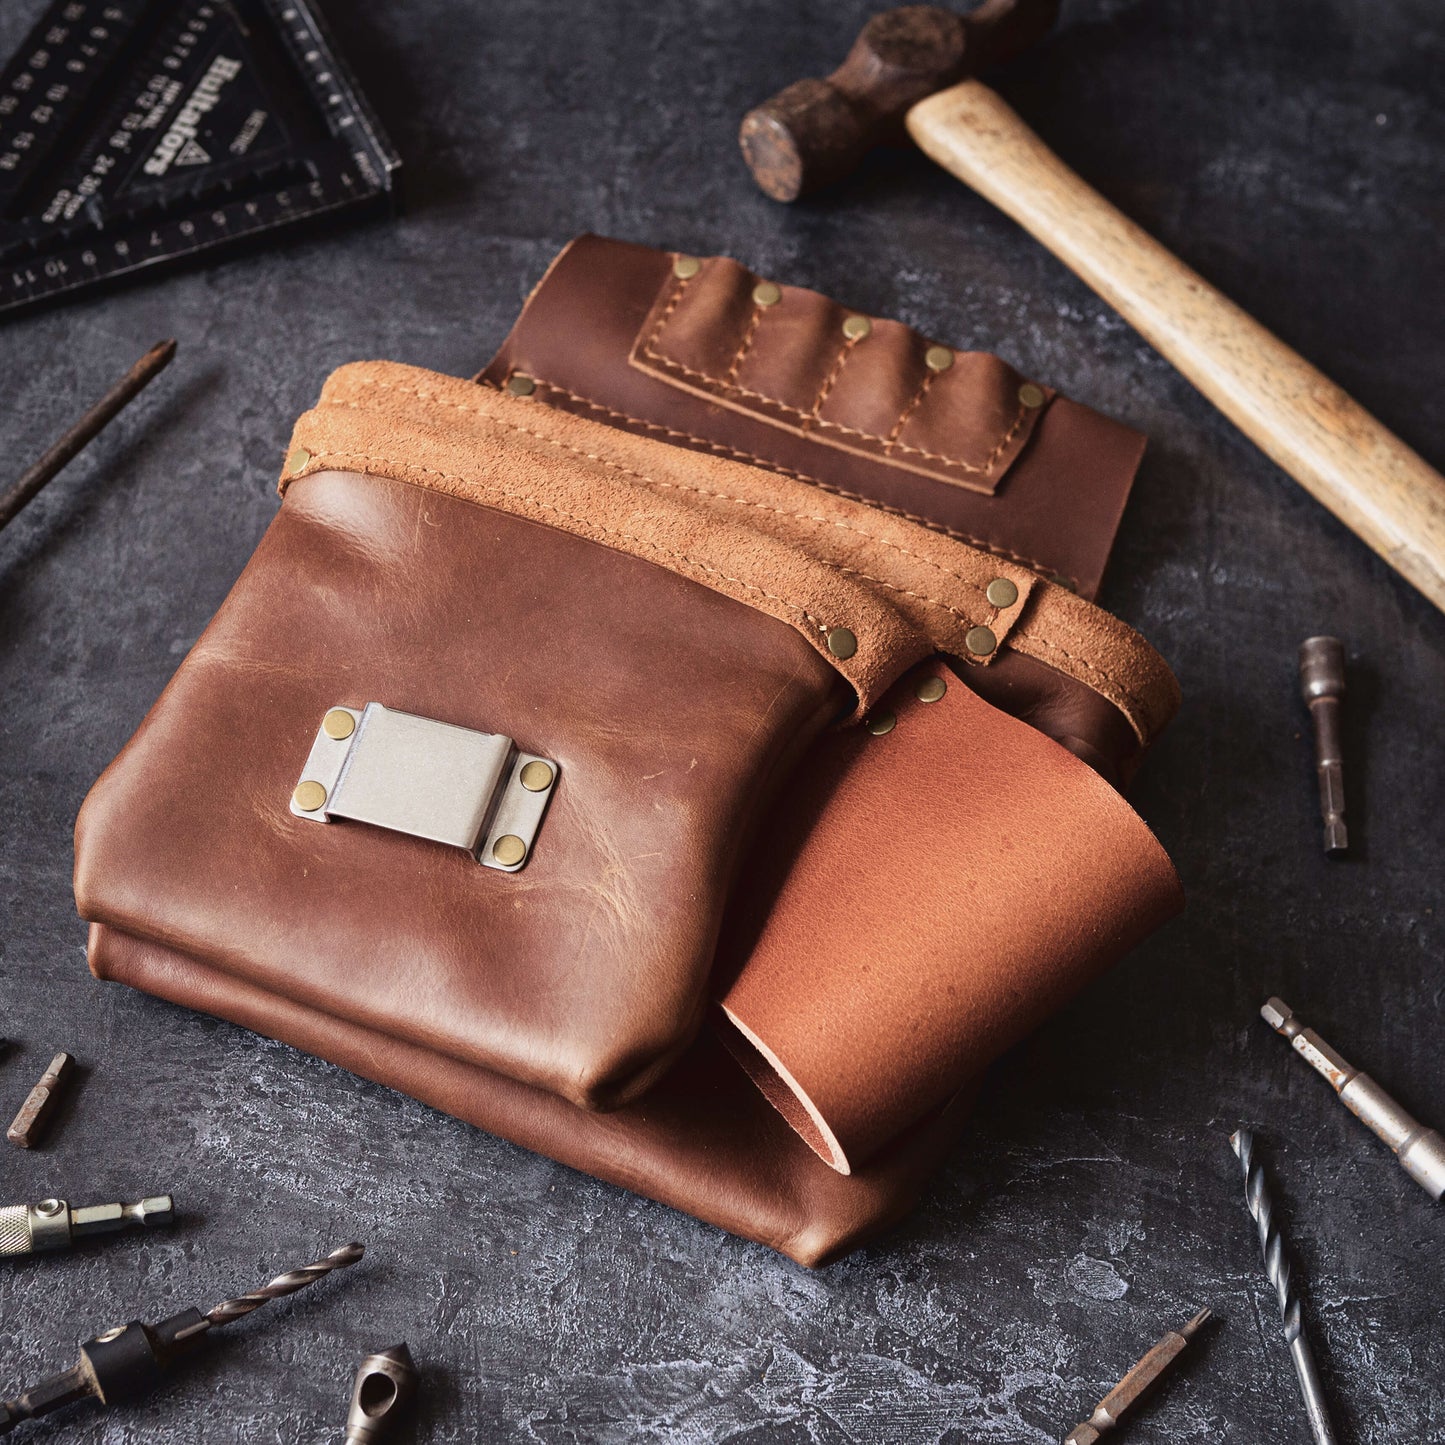 A collection of handcrafted leather goods, including a Belt Bag 1 by The Durham Leatherworker, tool roll, and journal cover, displayed alongside carpenter's metal tools on a dark, textured surface.